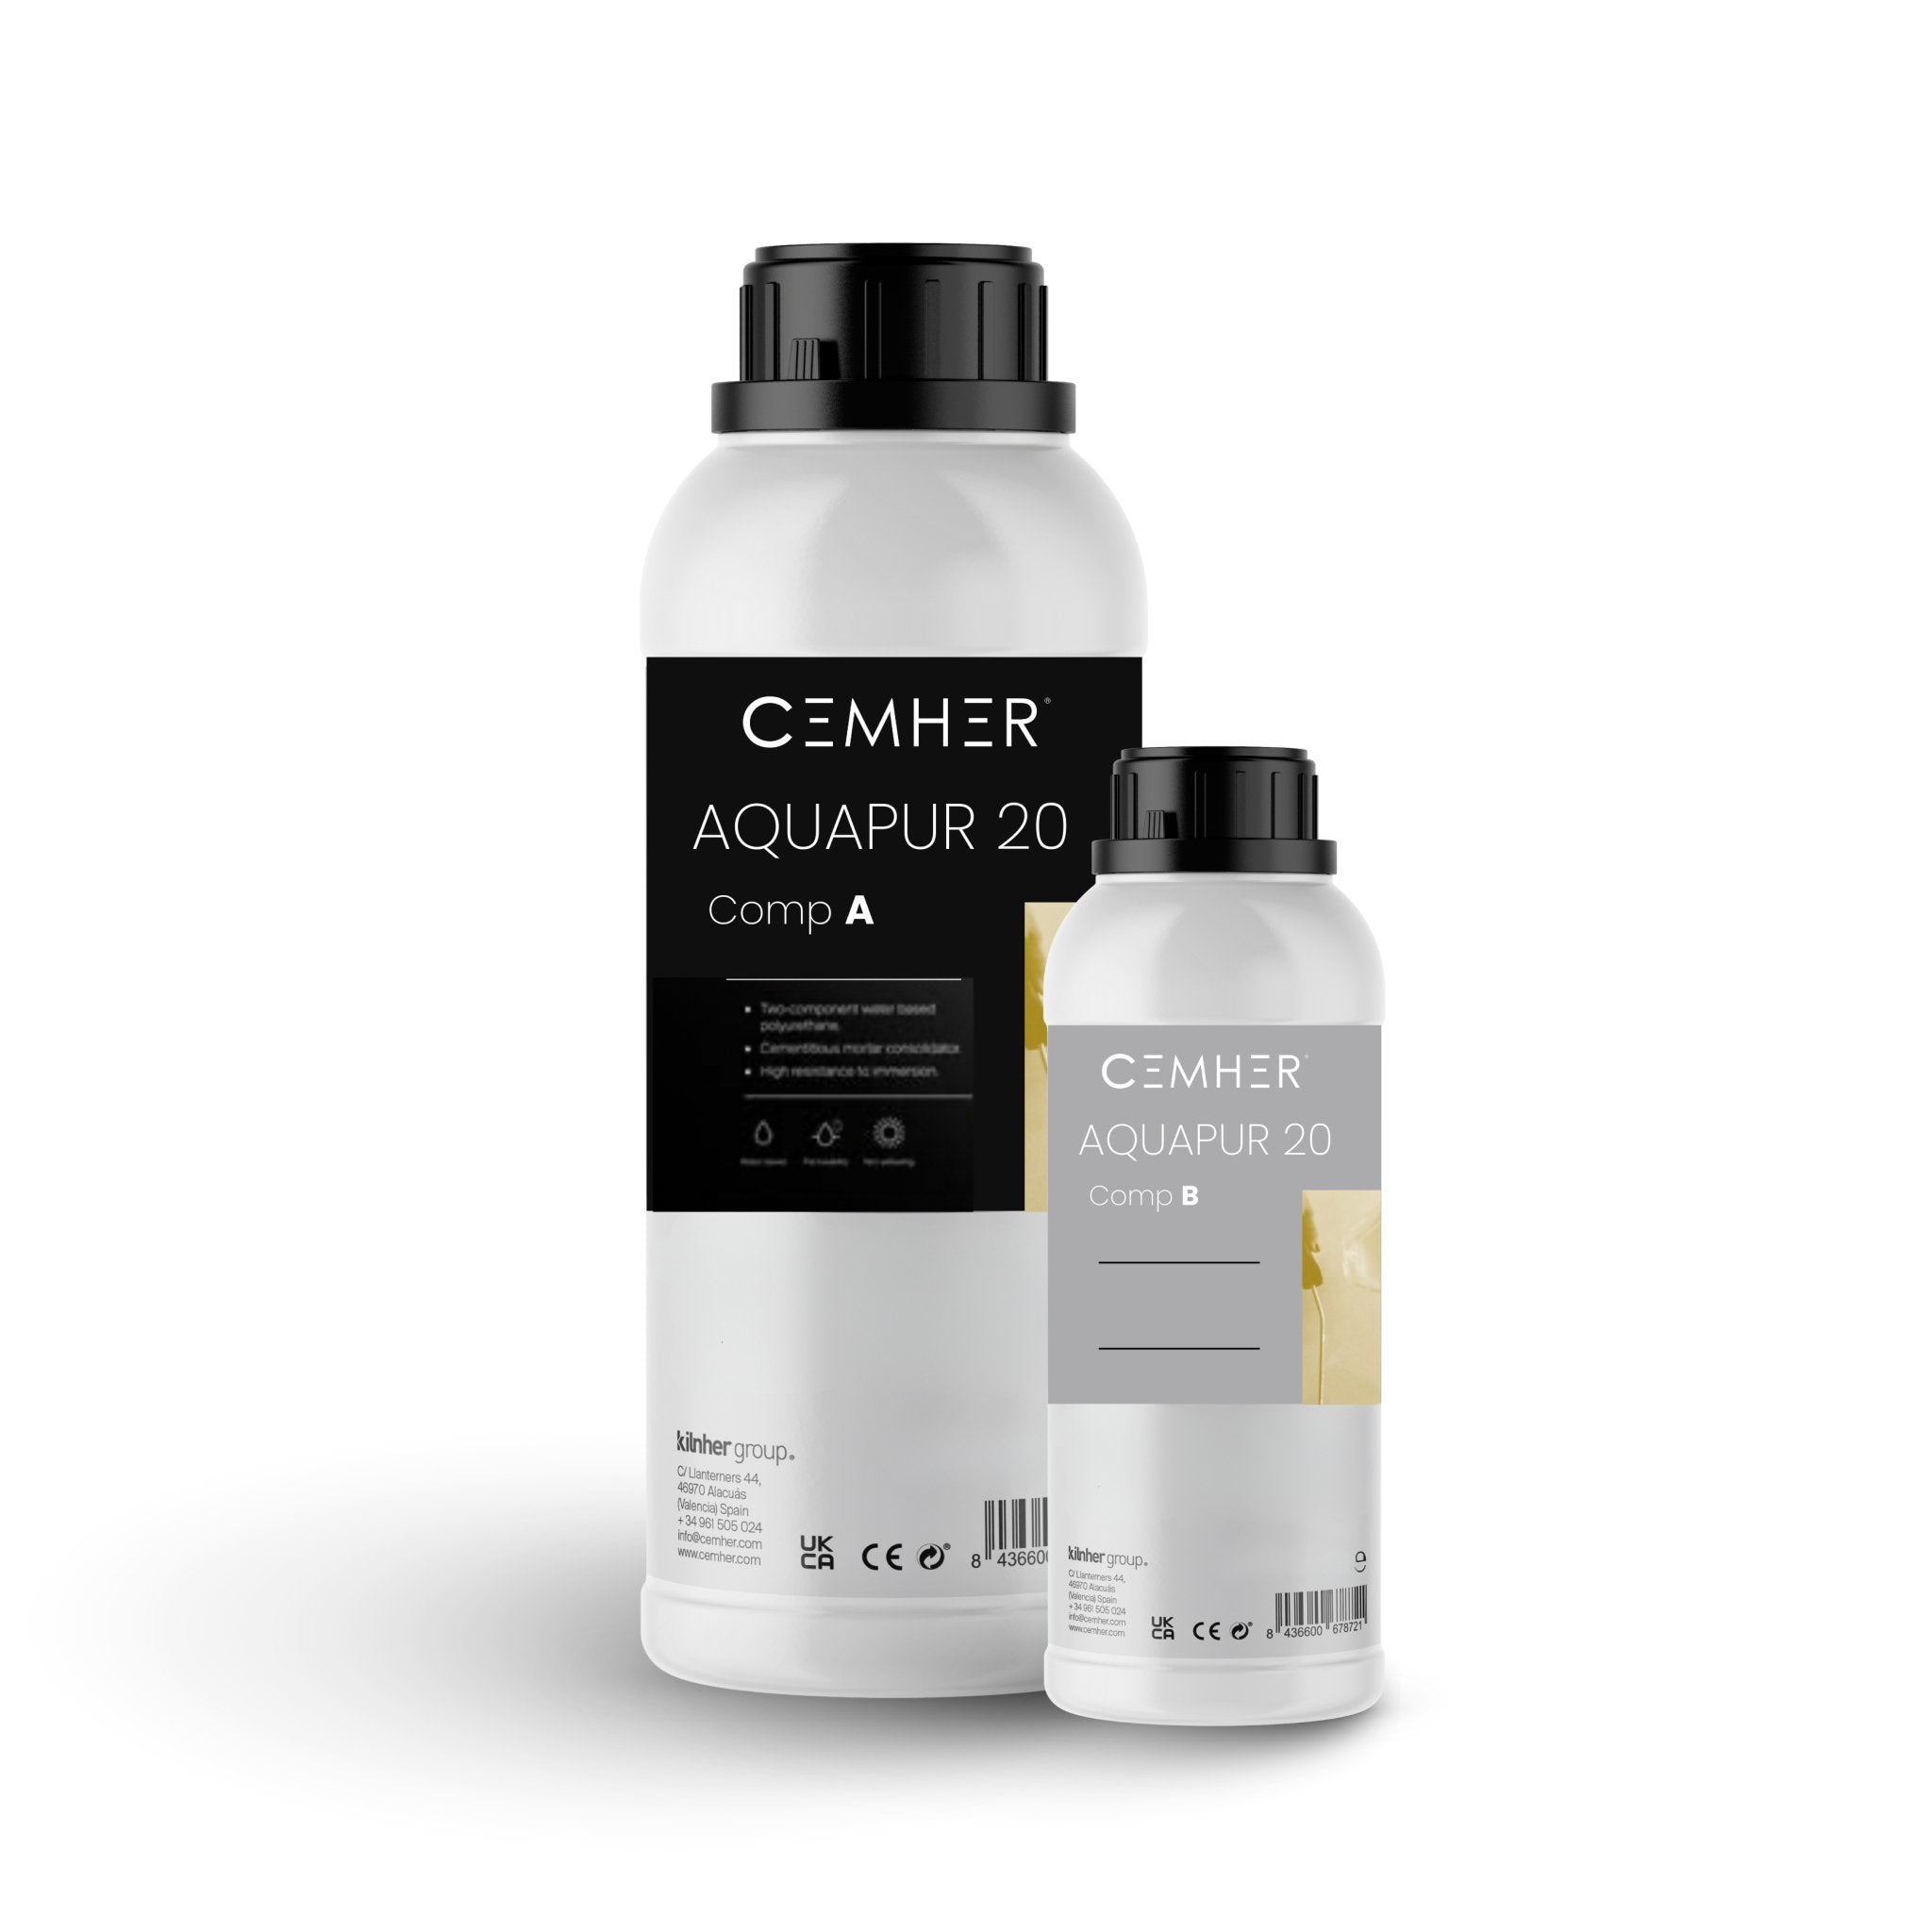 CEMHER AQUAPUR 20 SEALER (A+B) 1.2L - CEMHER